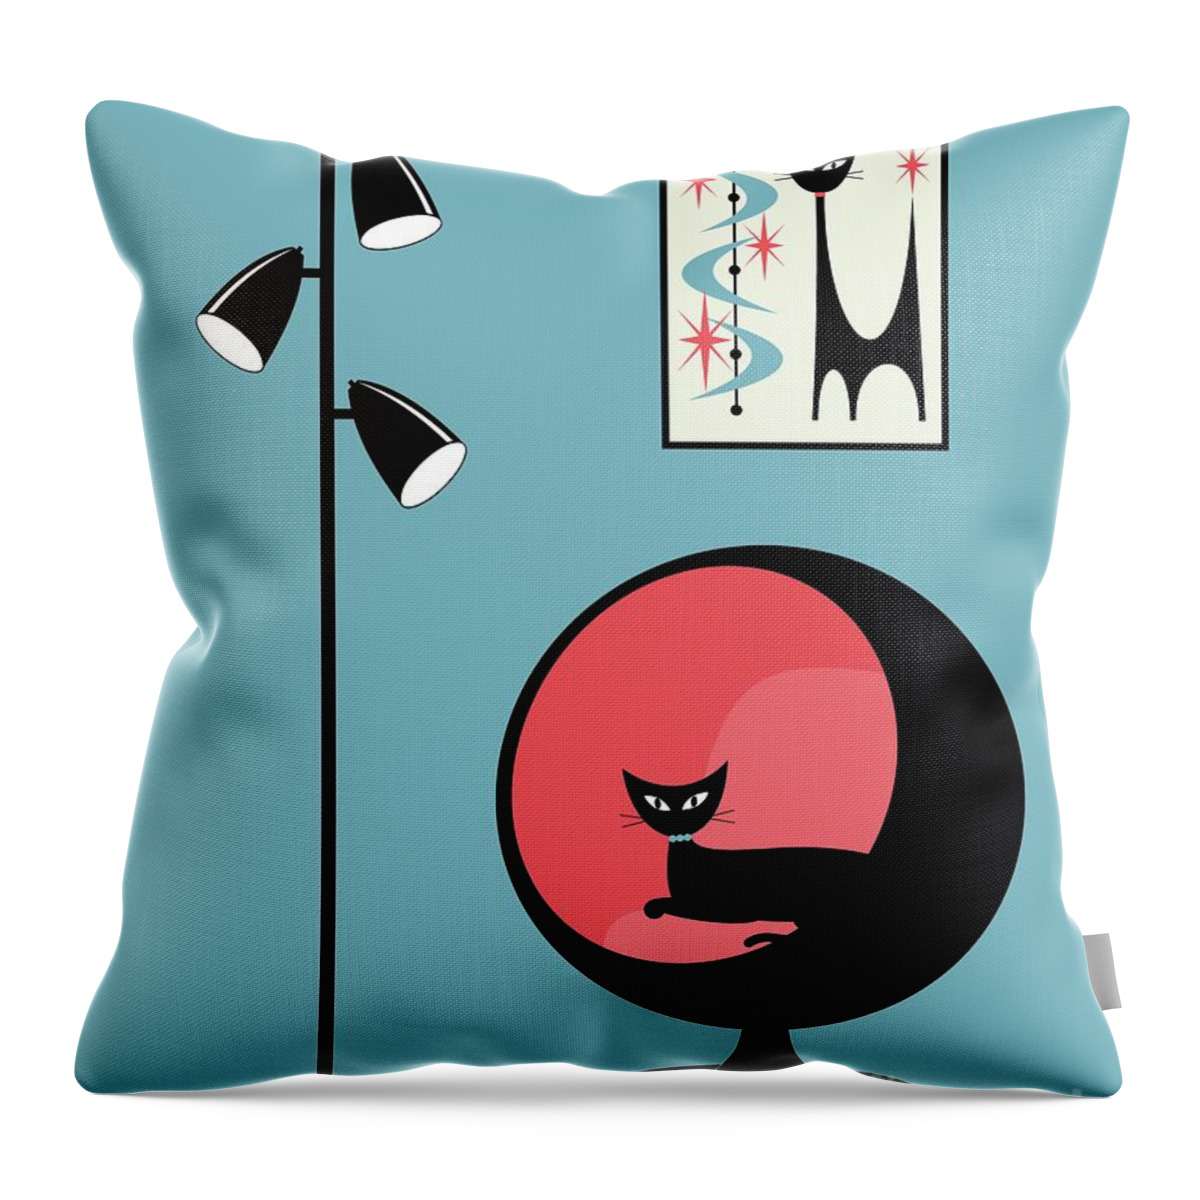 Mid Century Modern Throw Pillow featuring the digital art Mini Atomic Cat on Turquoise by Donna Mibus